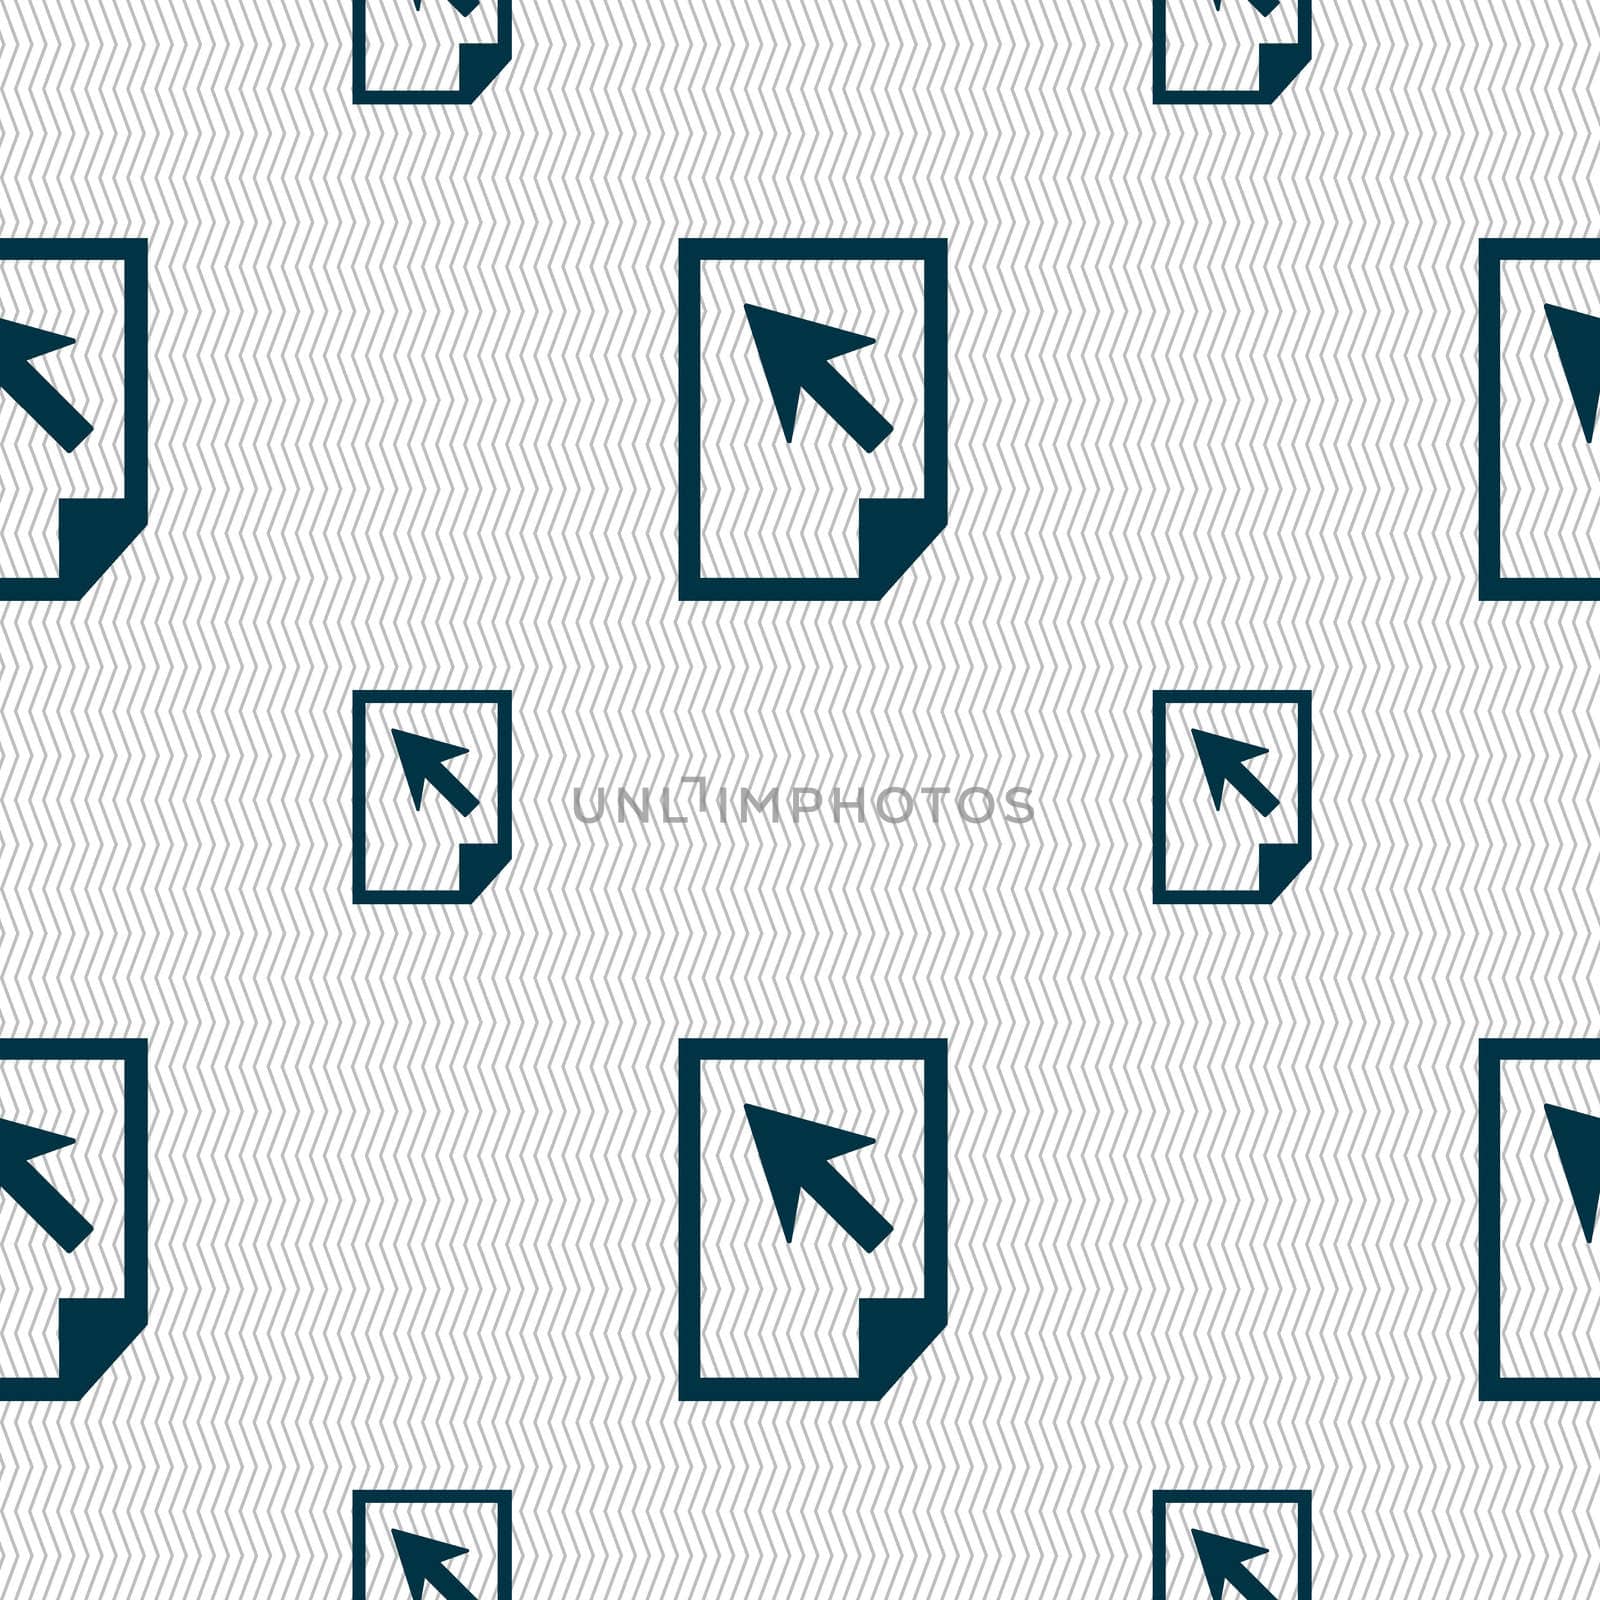 Text file sign icon. File document symbol. Seamless pattern with geometric texture. illustration